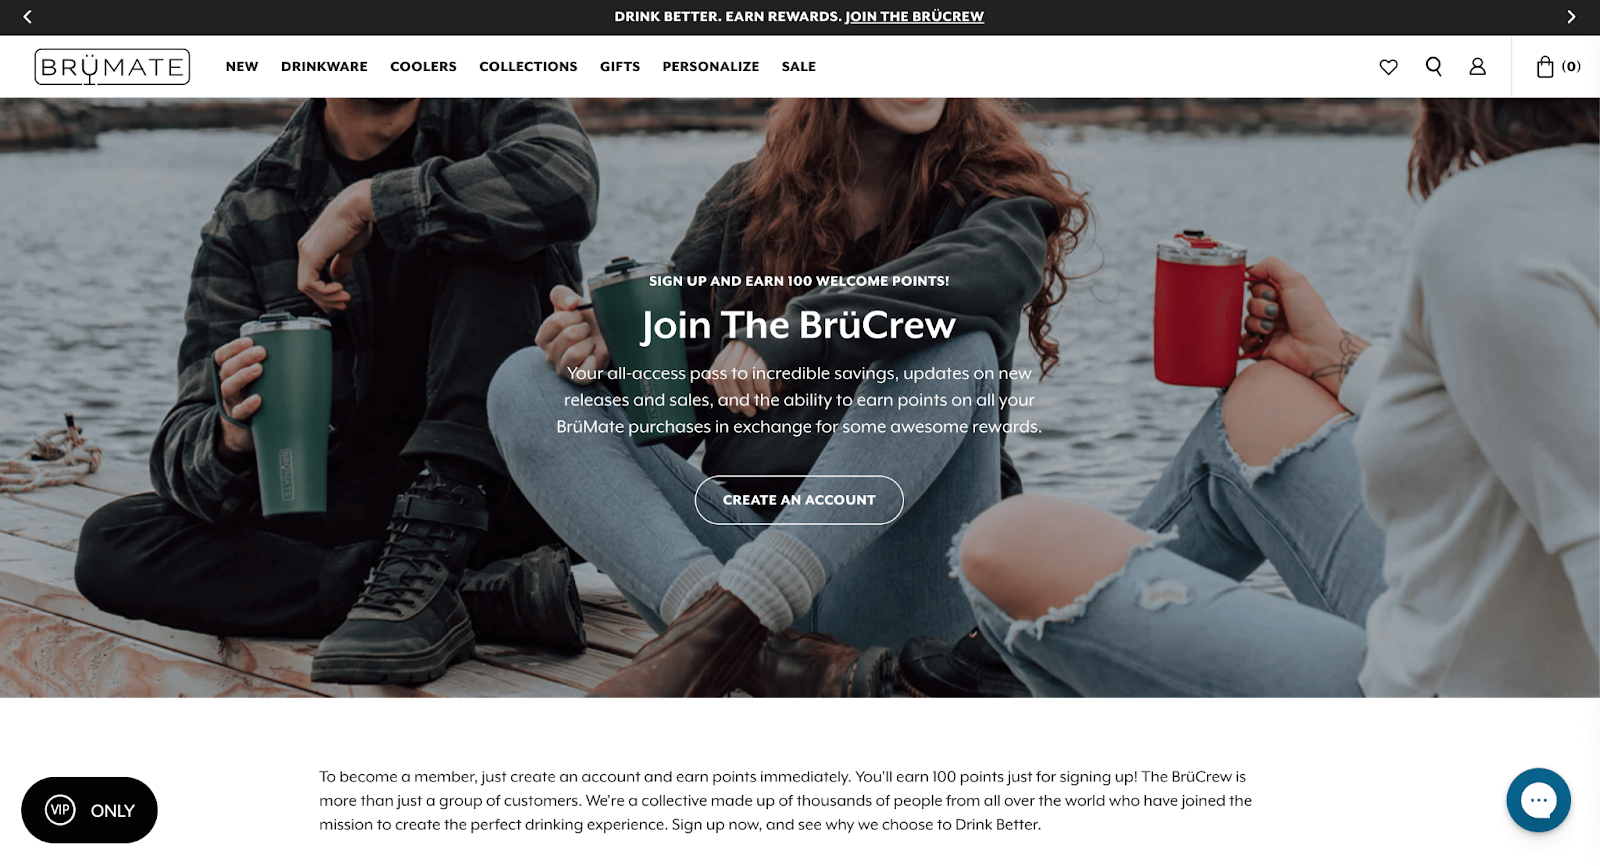 Top 10 Loyalty Programs 2022–A screenshot of BrüMate’s loyalty program explainer page. The background shows 3 people sitting beside a lake holding insulated drinkware. The text on top of the image reads, “Sign up and earn 100 welcome points! Join the BrüCrew. Your all-access pass to incredible savings, updates on new releases and sales, and the ability to earn points on all your BrüMate purchases in exchange for some awesome rewards. Create an account.”